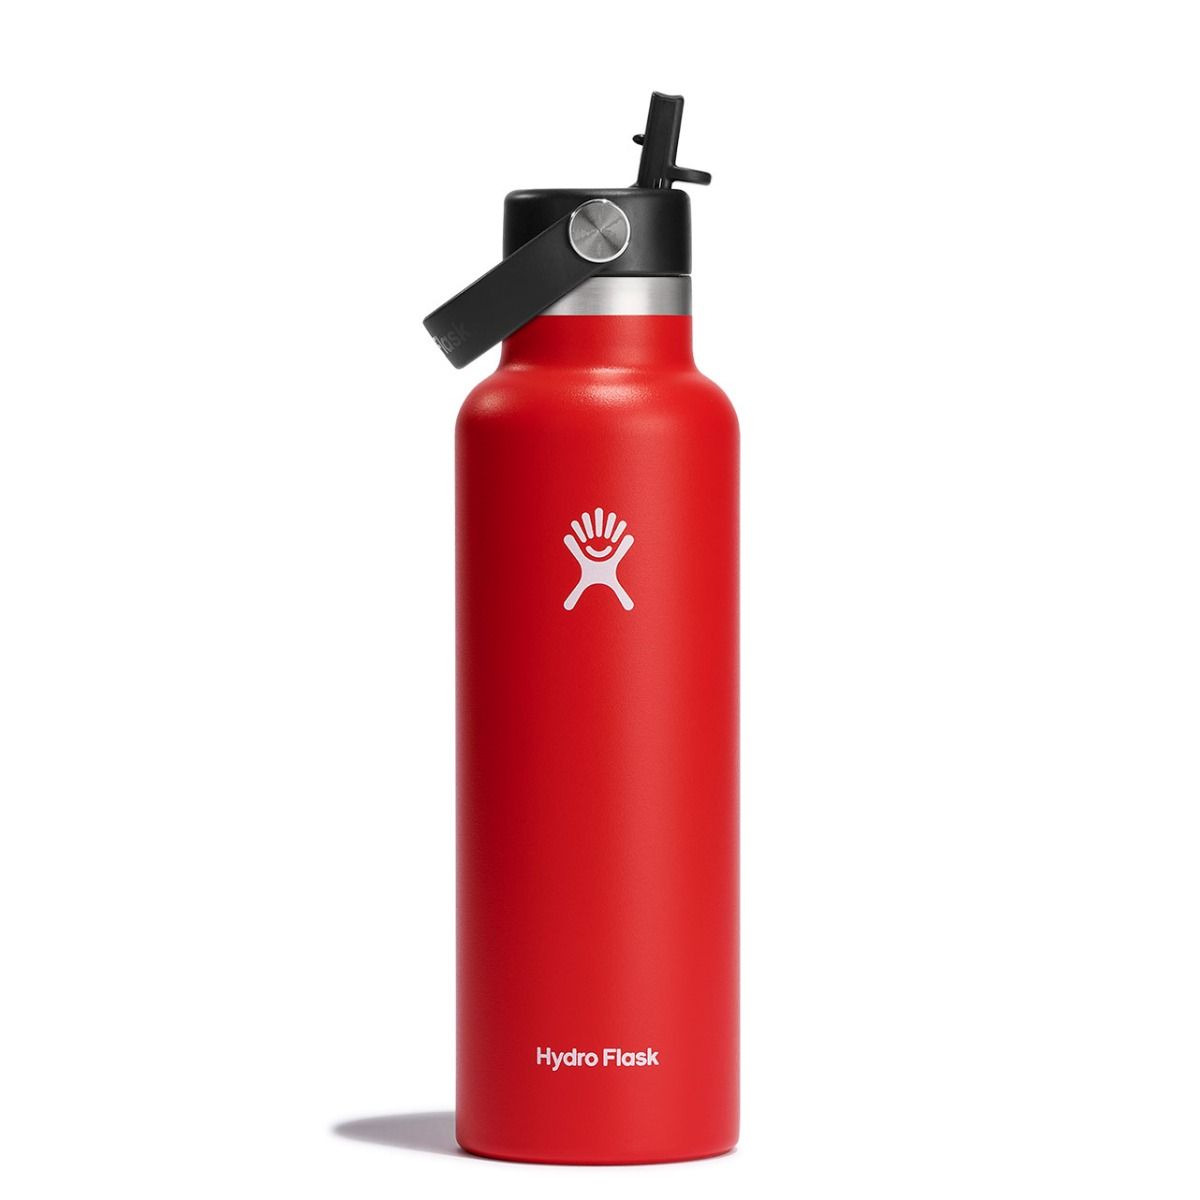 Hydro Flask - 21oz. Flex Straw Vacuum Insulated Stainless Steel Water Bottle